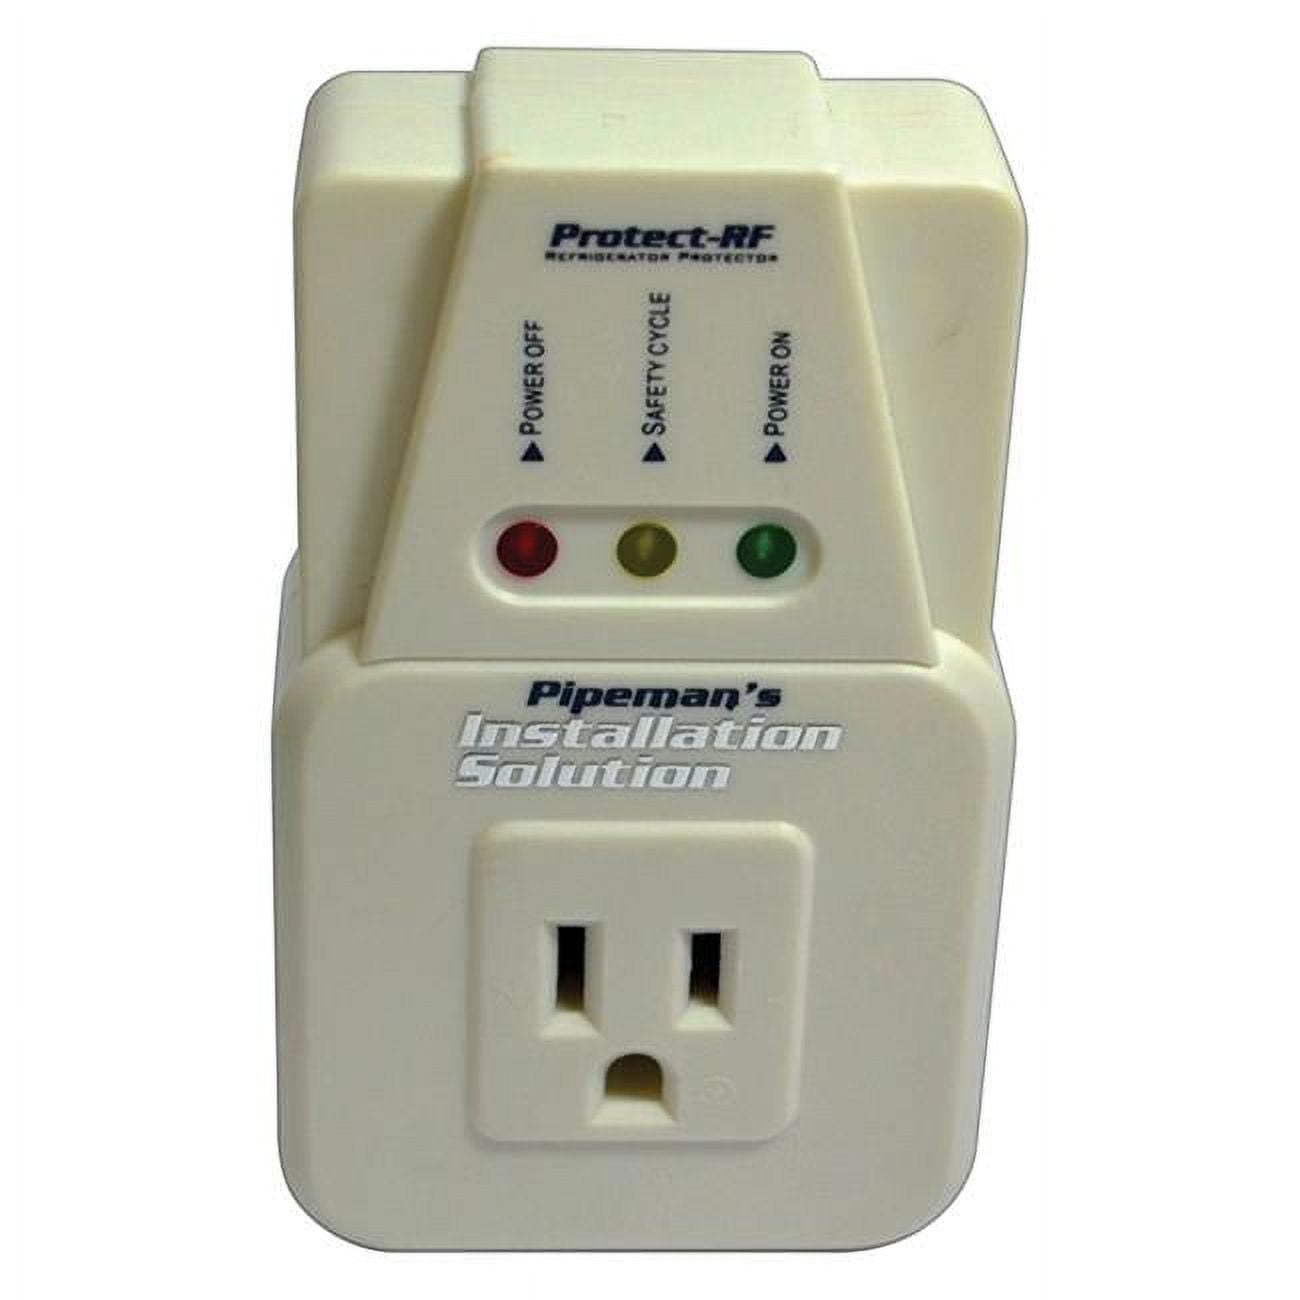 Invest in Safety: Why Your Fridge Needs a Surge Protector - SafetyFrenzy